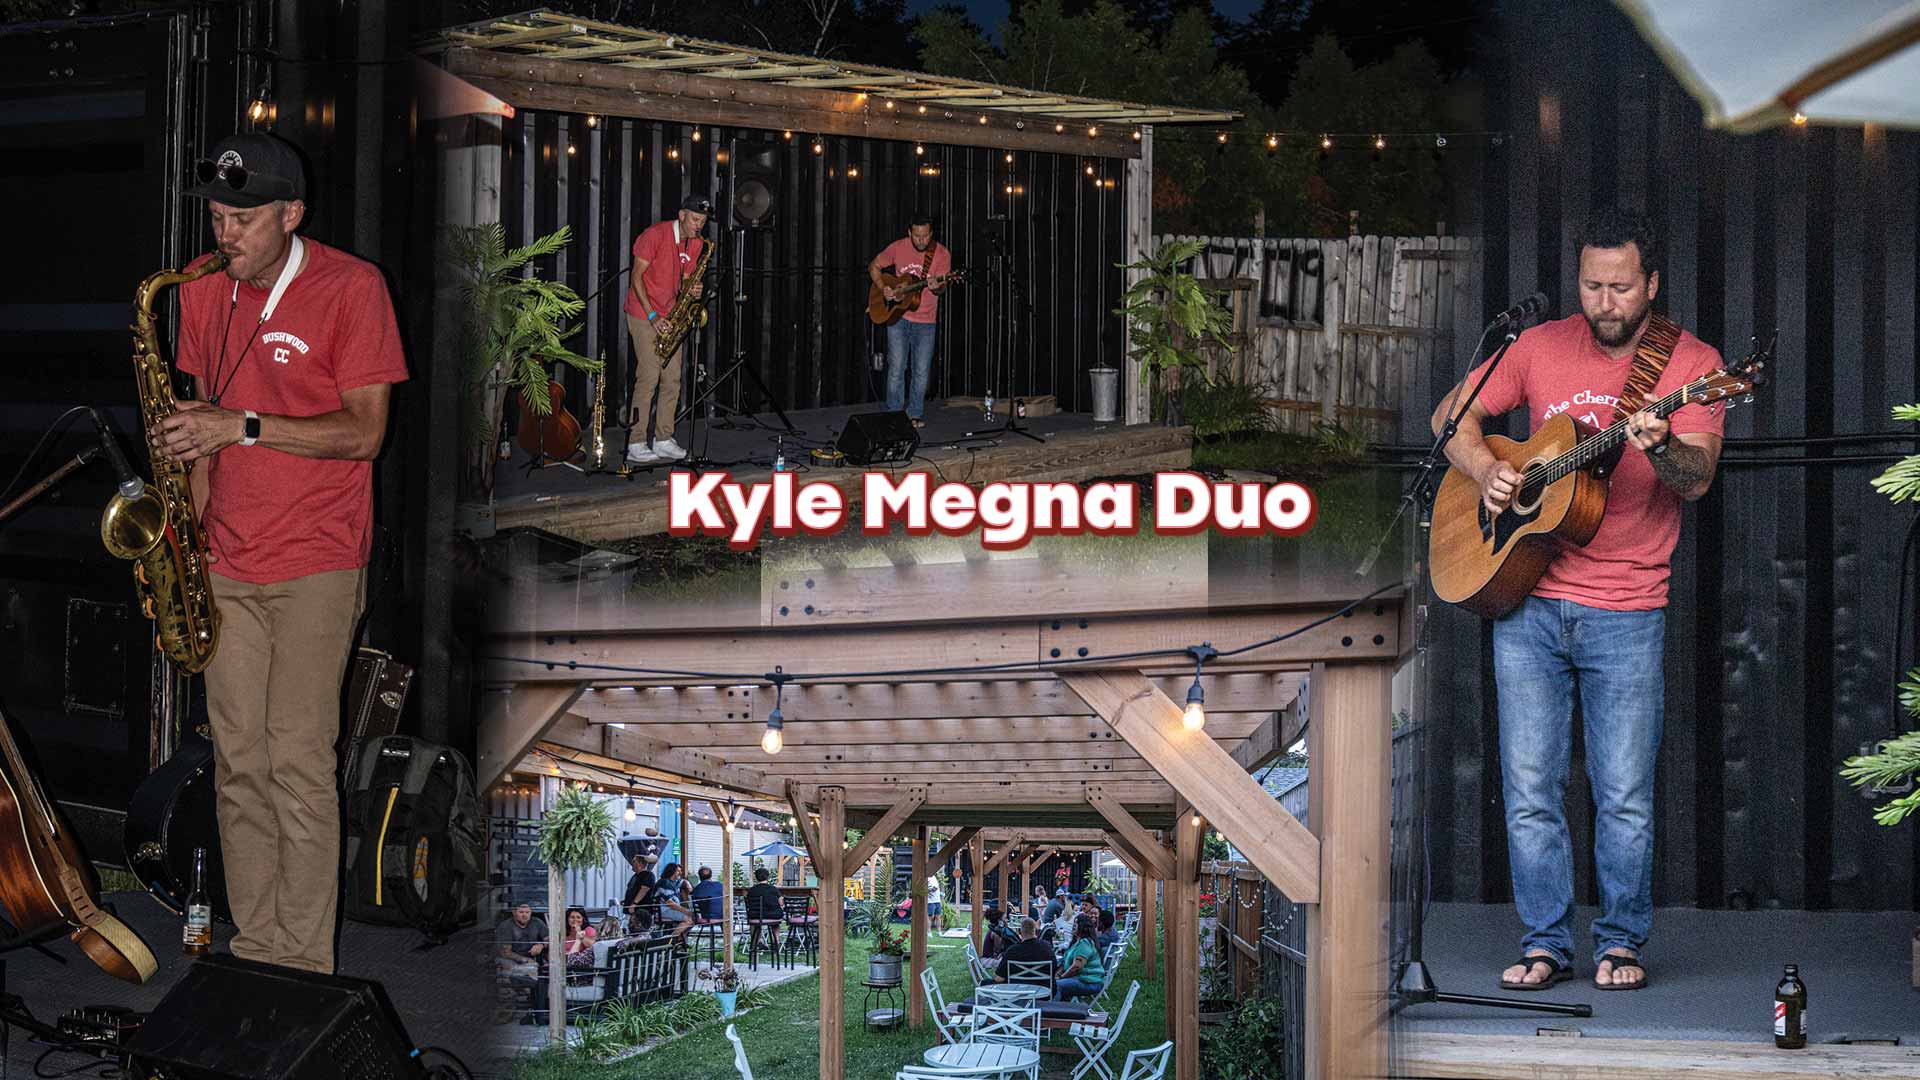 Kyle Magana Duo at Area 509 in Appleton Wi